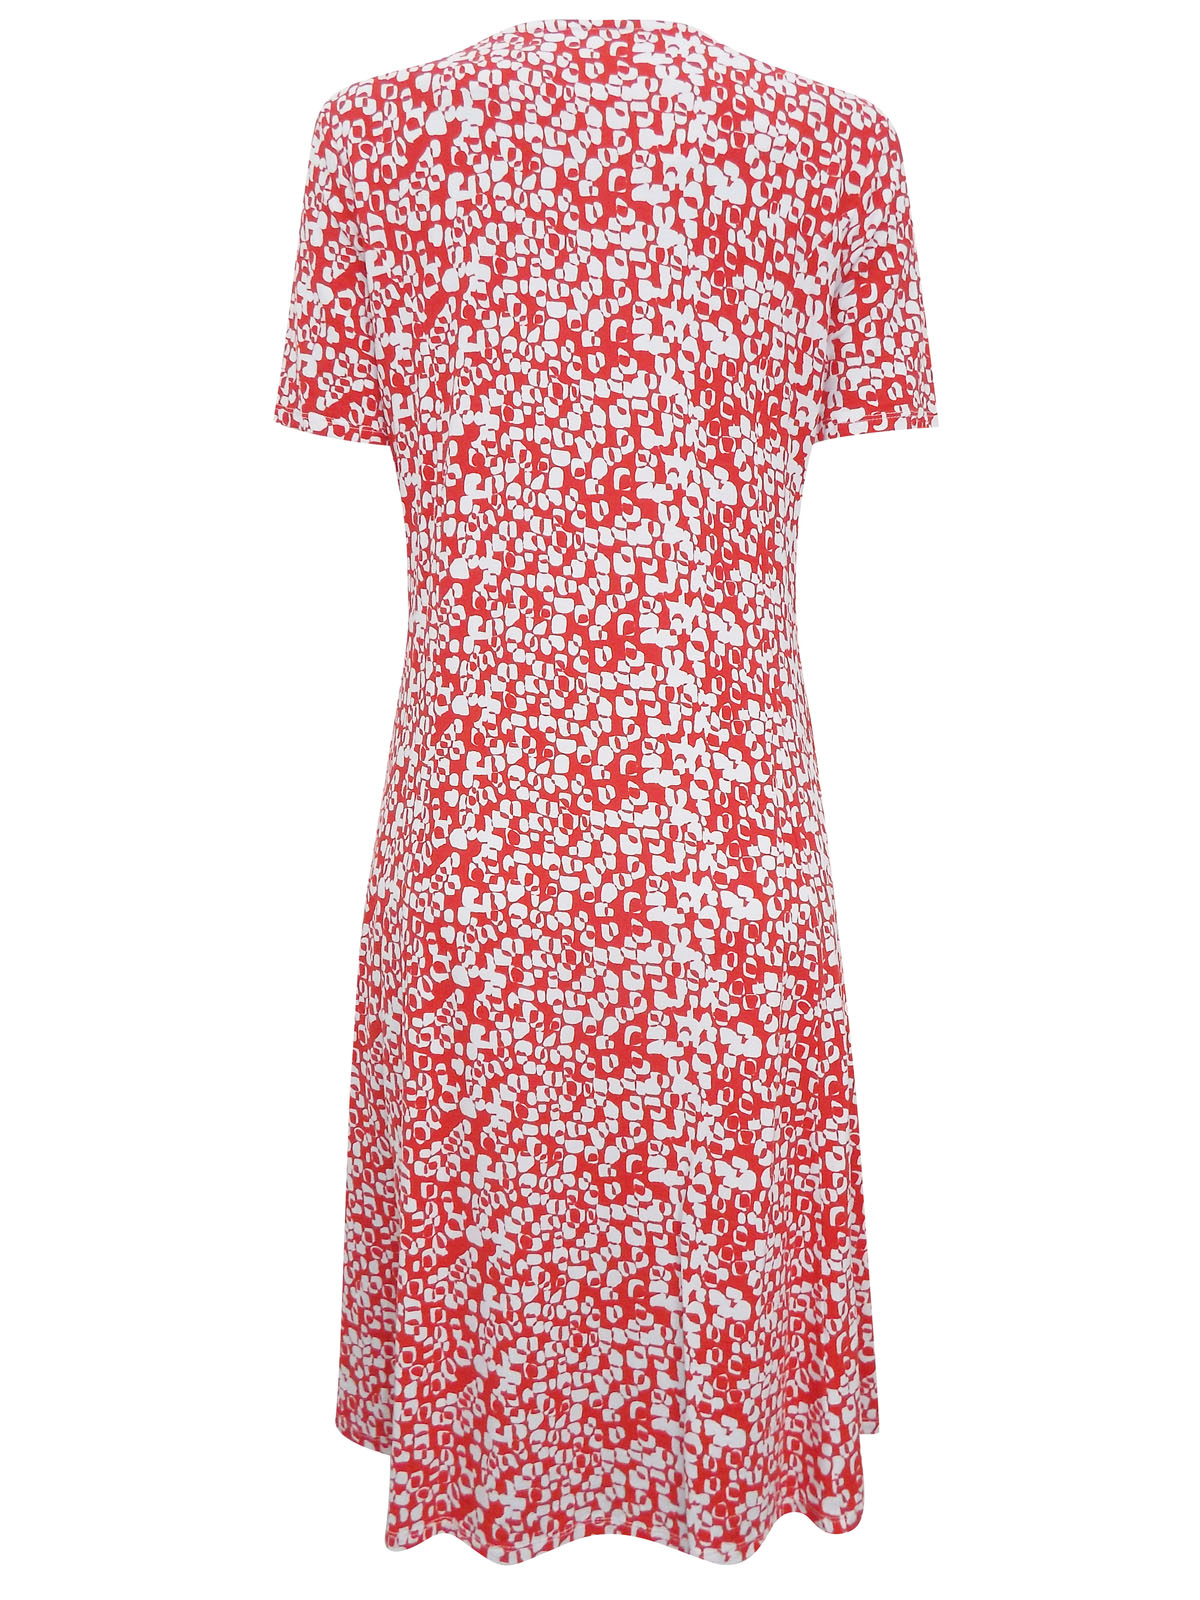 First Avenue RED Block Print Short Sleeve Swing Dress - Size 12 to 20